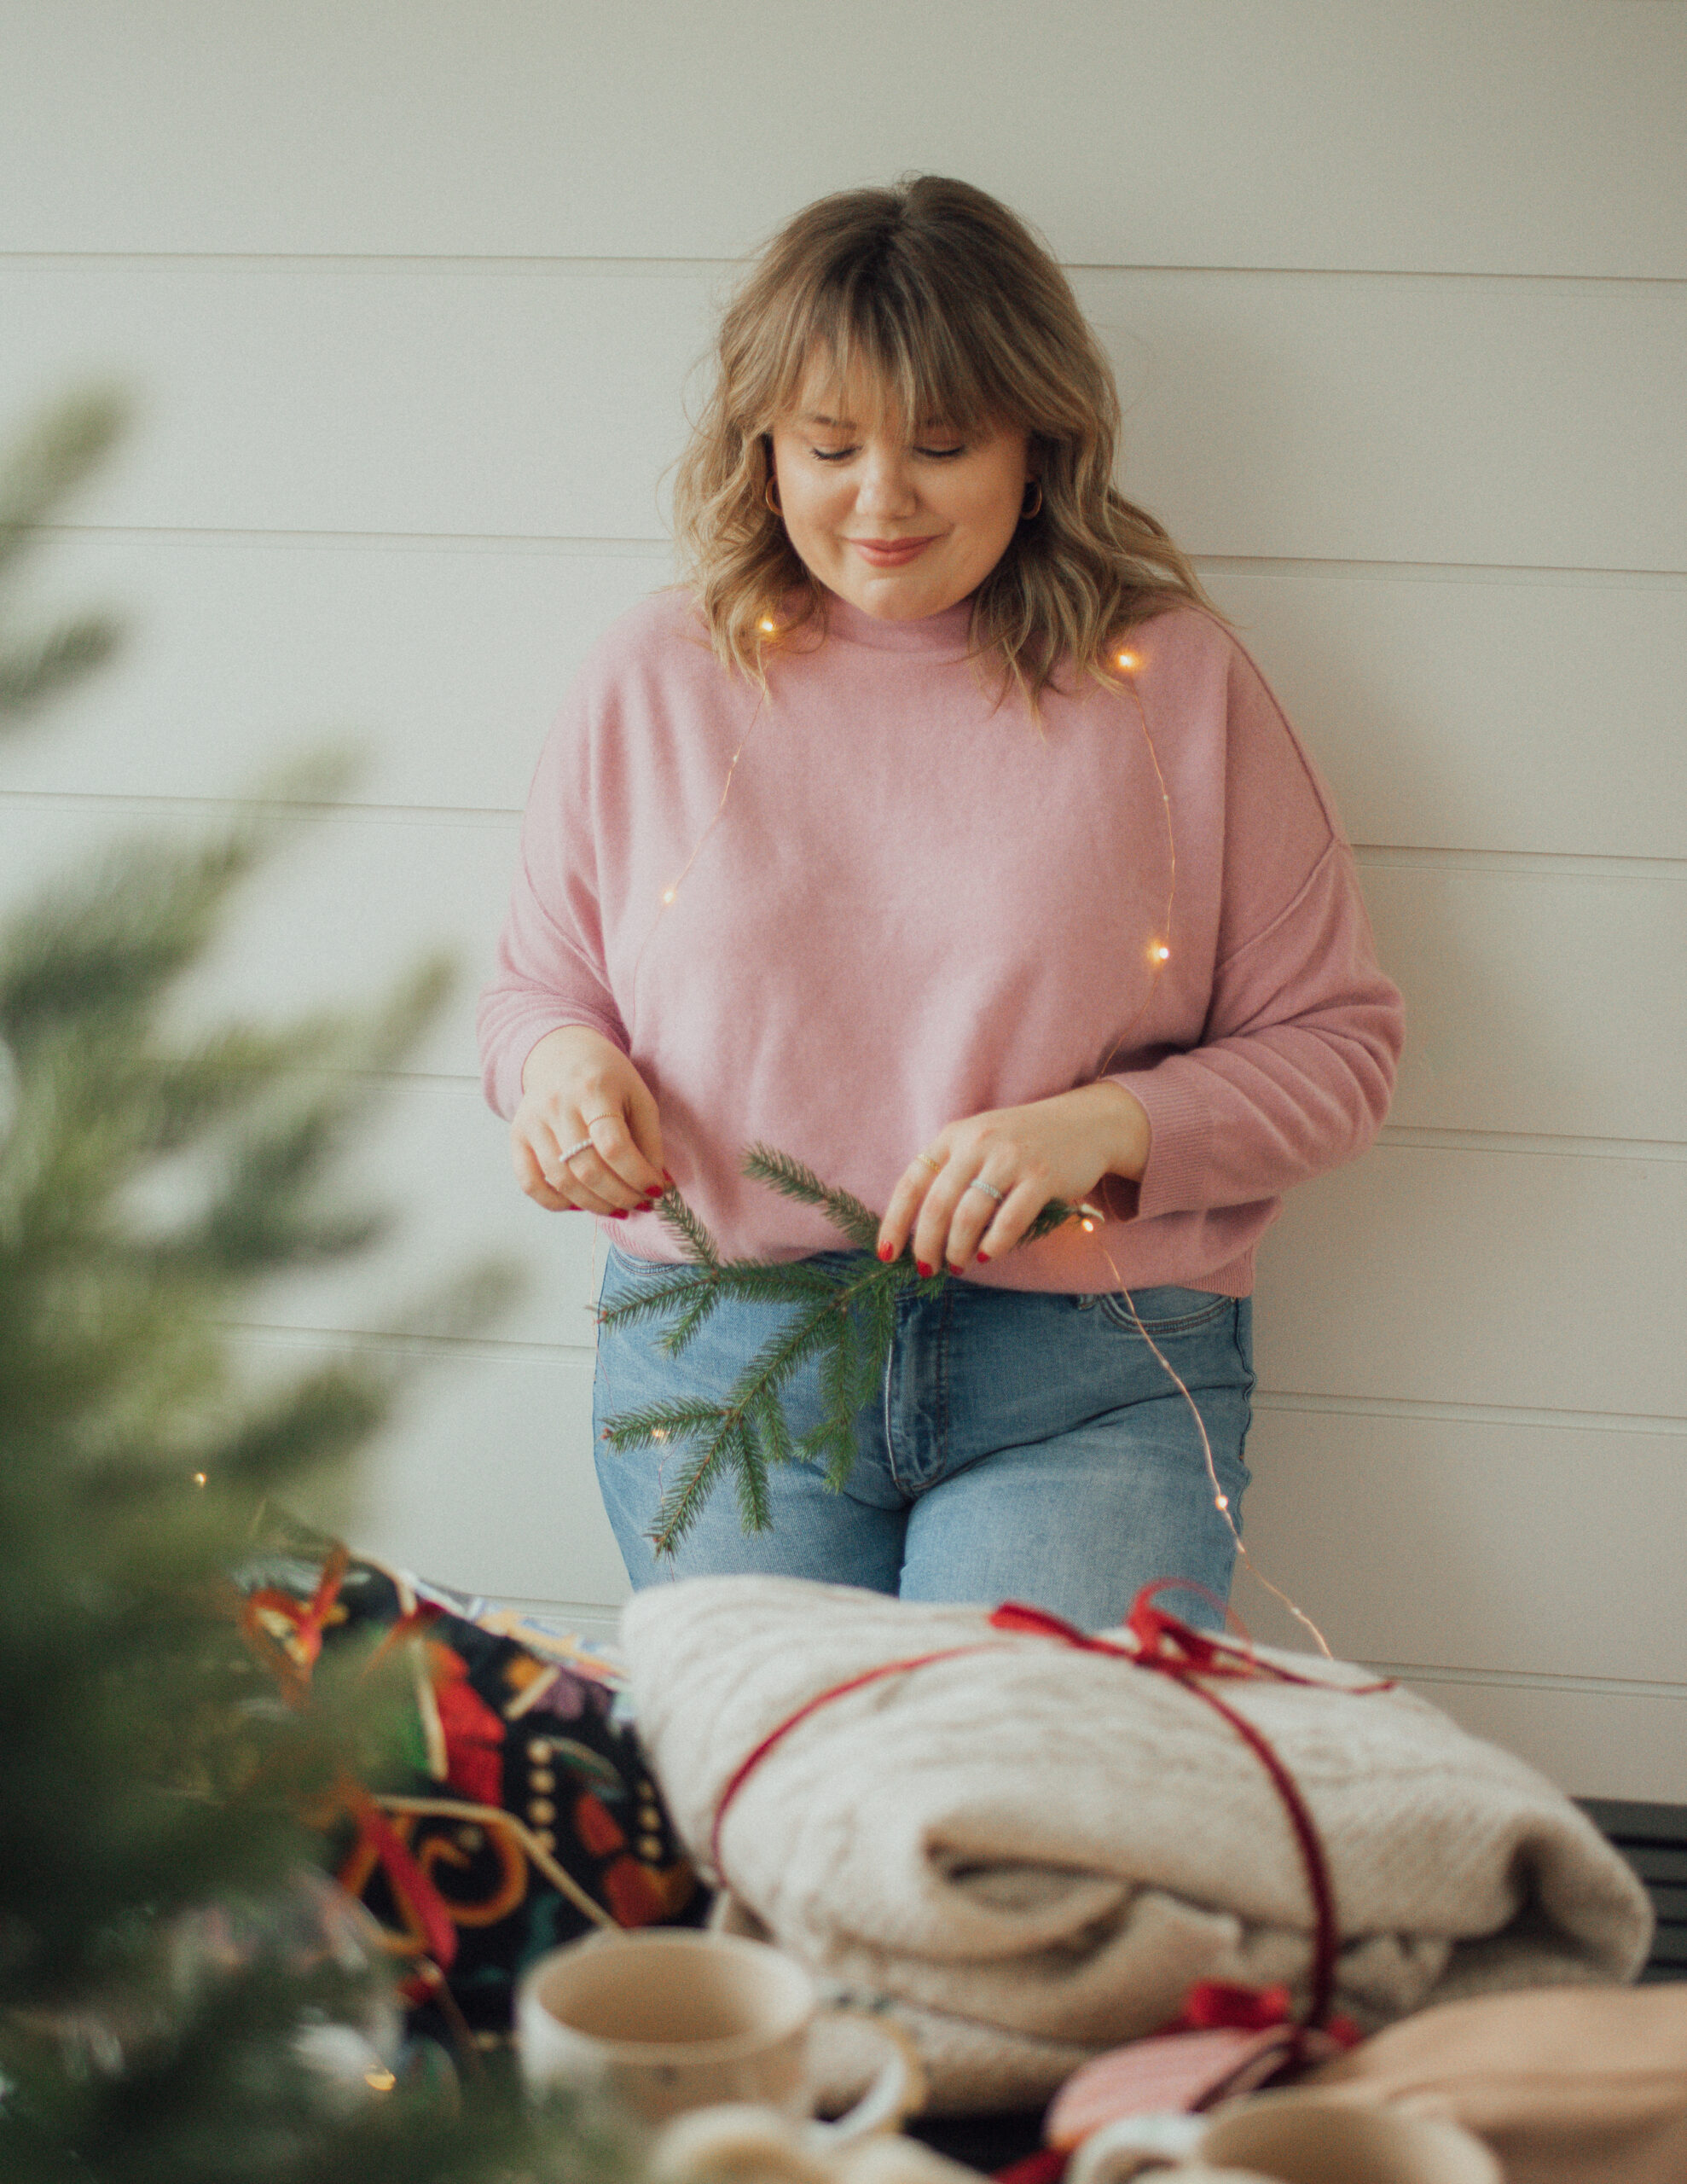 Sharing some of the seasons best gifts from Anthropologie. This year Anthro has some of the best gifts for the fashion girl in your life. 